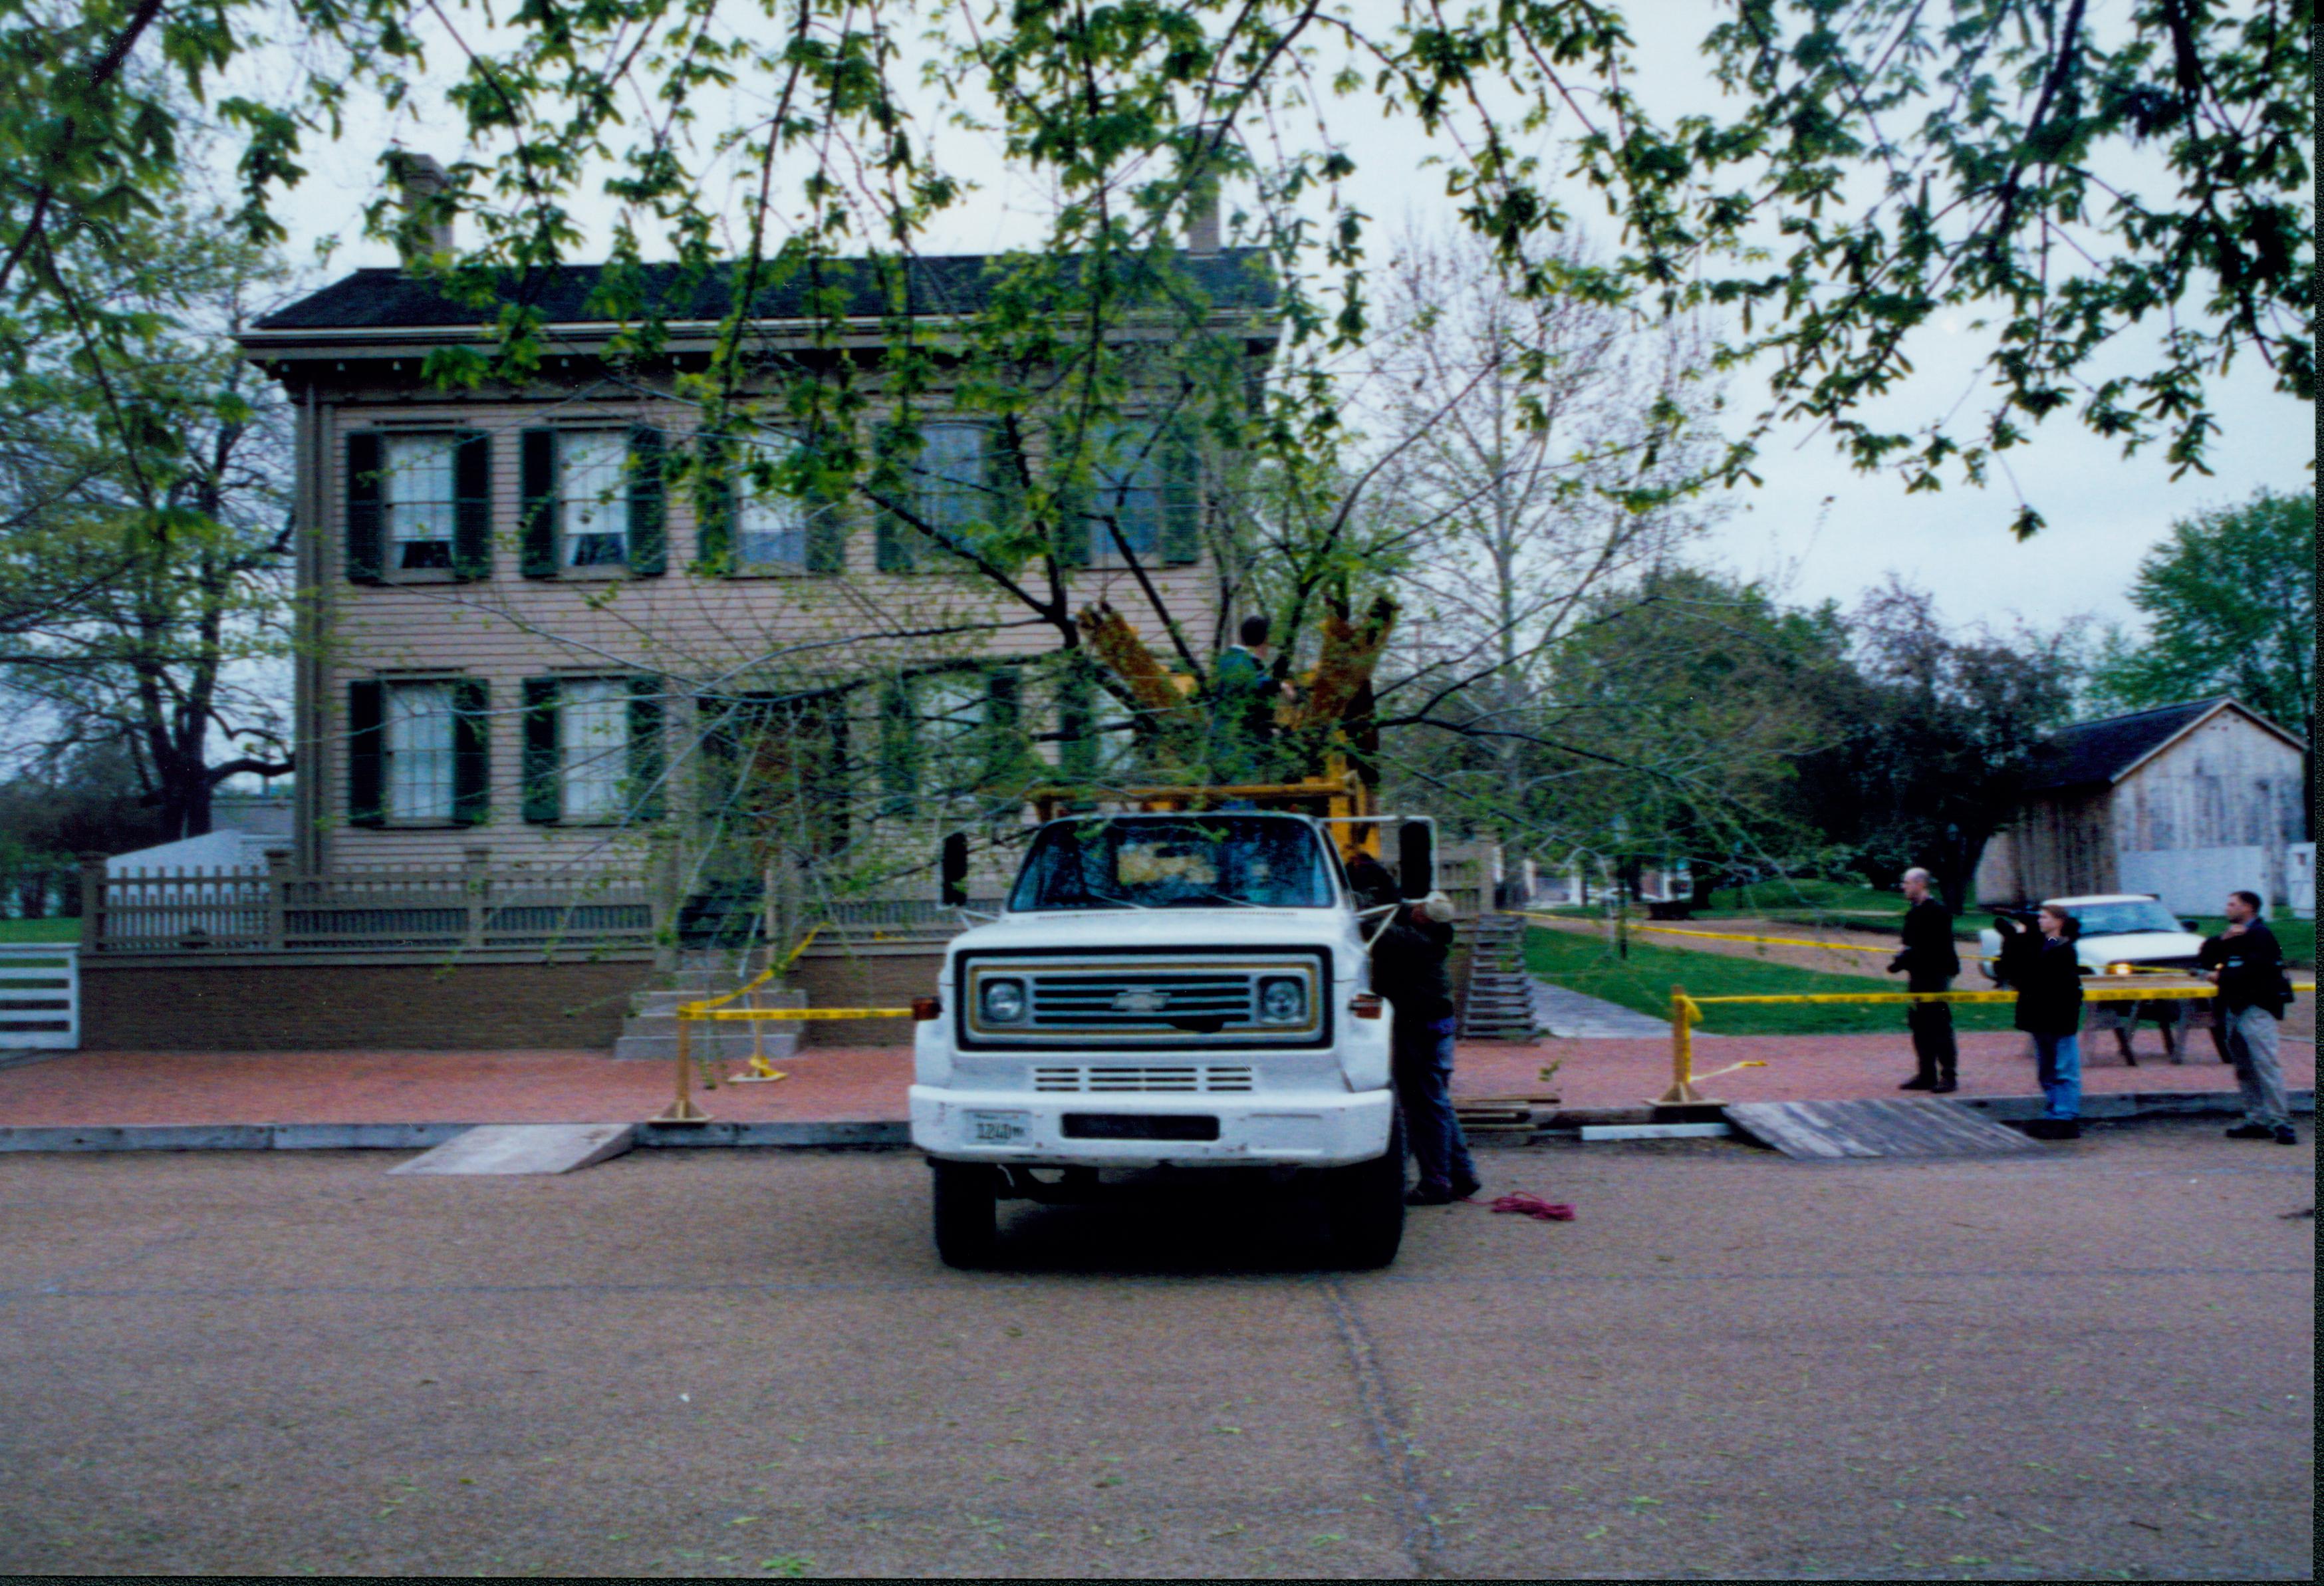 Elm tree replacement - Pleasant Nursery staff tying down tree for transport from front of Lincoln Home brick plaza. Reporters watch on far right in front of unpainted Arnold Barn. Looking East from west side of 8th Street Elm tree, 8th Street, Lincoln Home, brick plaza, Pleasant Nursery, reporters